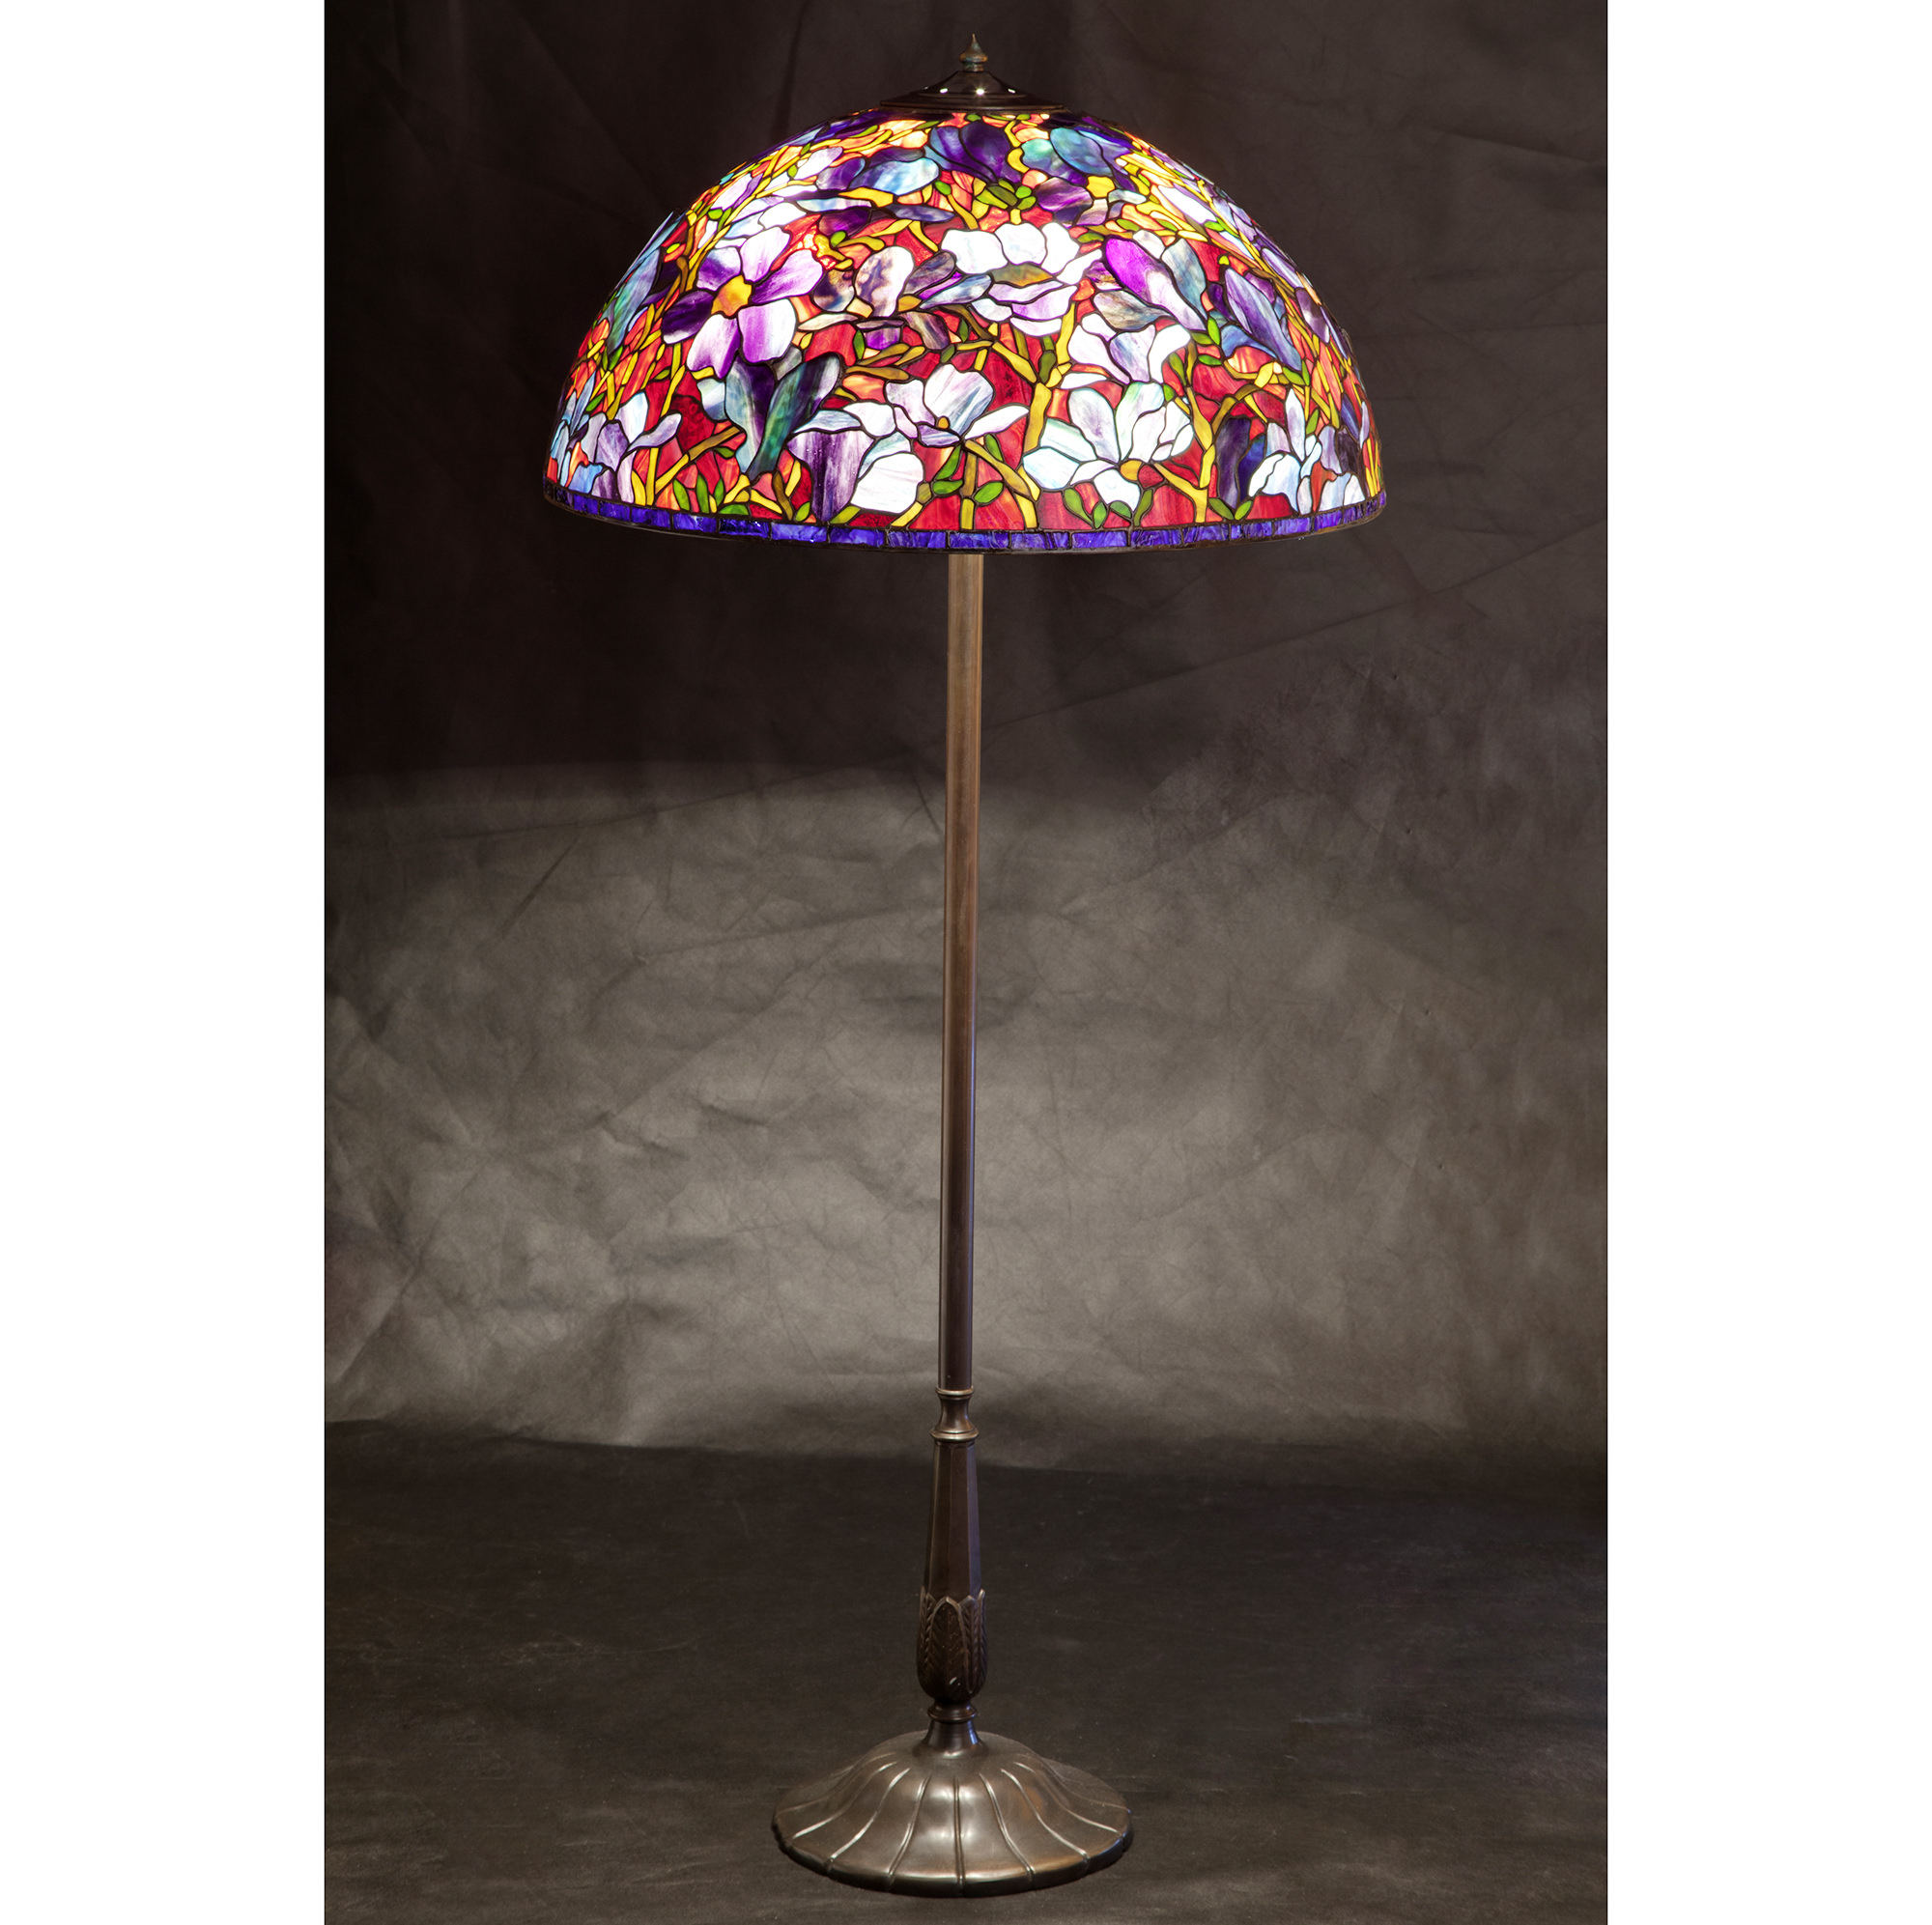 Glass Lamp Covers Frosted Floor Shade Shade Is A Valuable intended for proportions 2000 X 1993